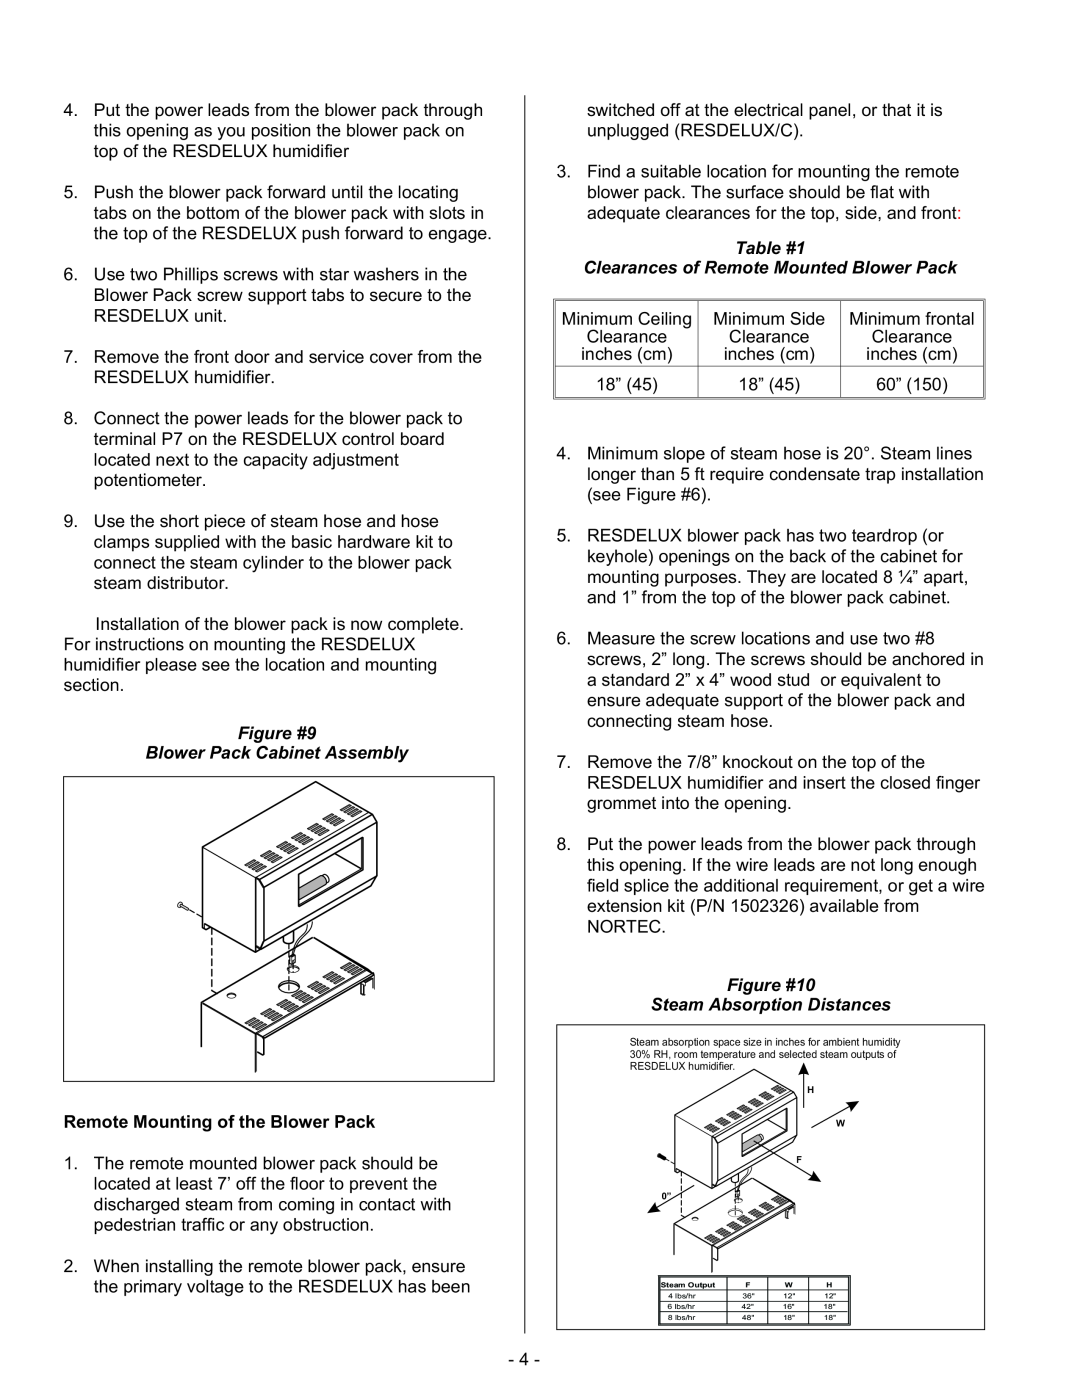 Nortec Steam Humidifiers manual Figure #9 Blower Pack Cabinet Assembly, Remote Mounting of the Blower Pack 